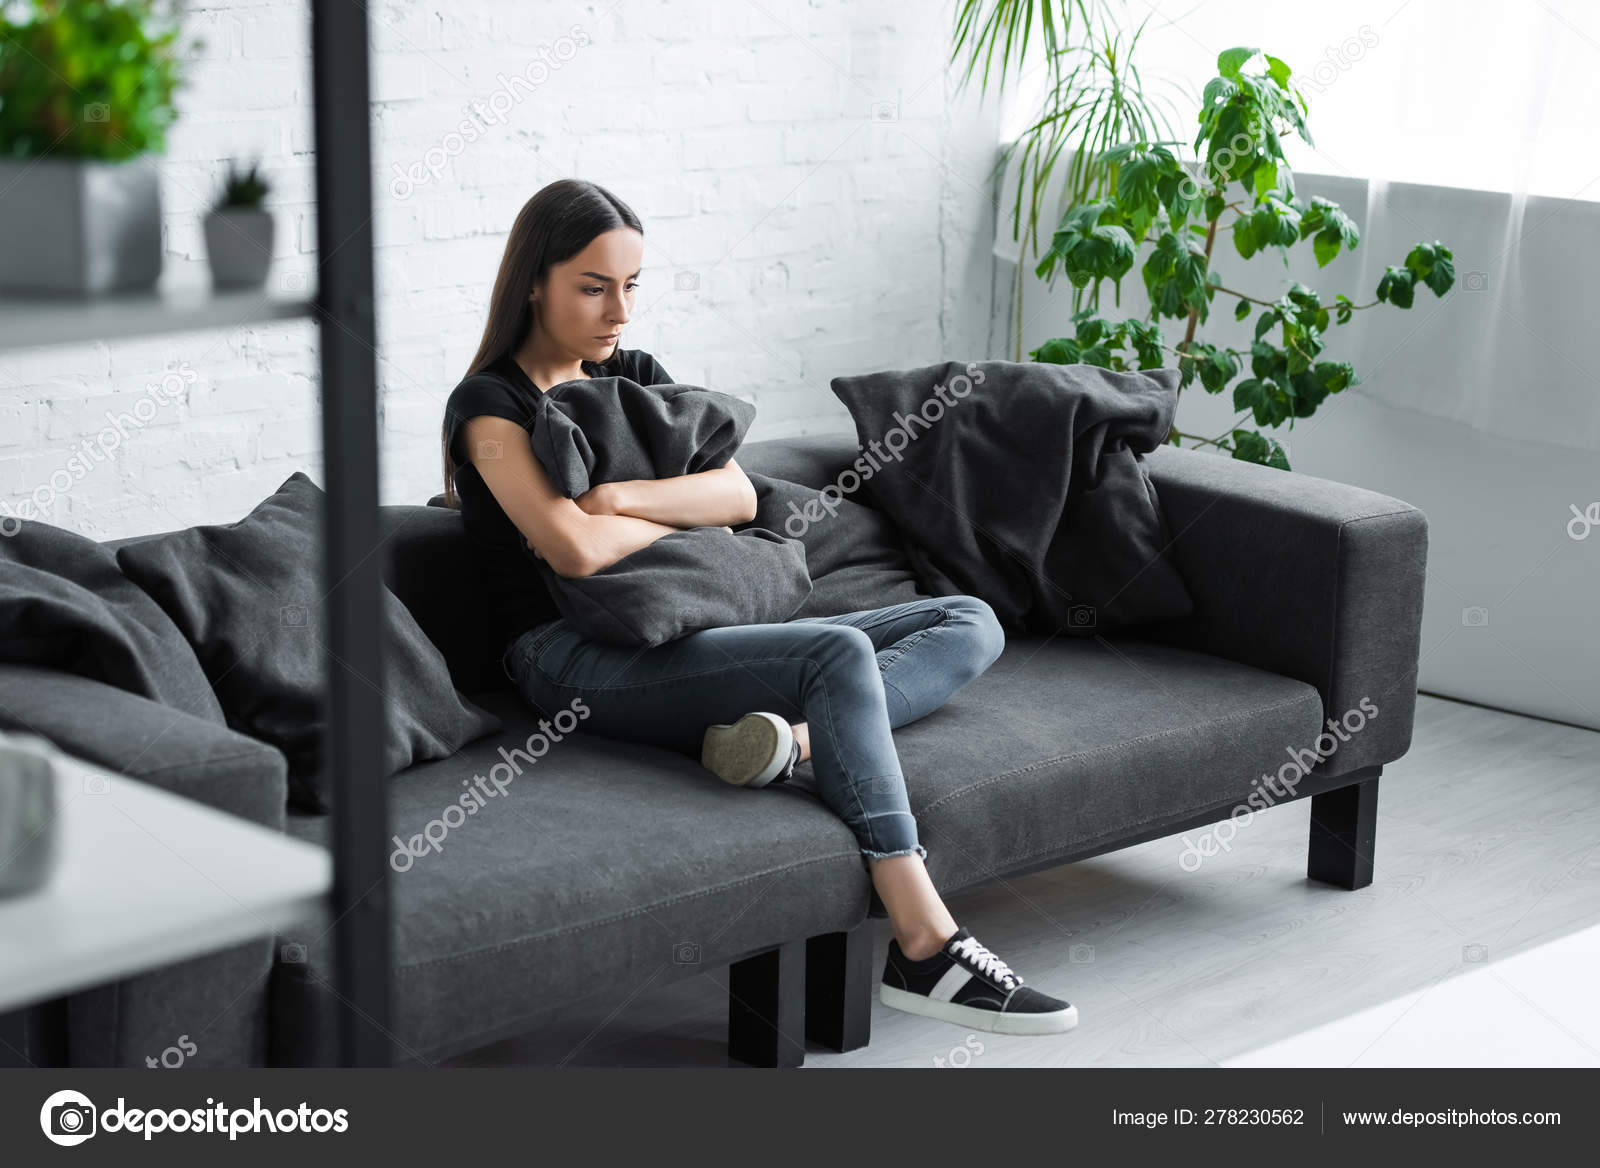 86,784 Woman Sitting On Pillow Images, Stock Photos, 3D objects